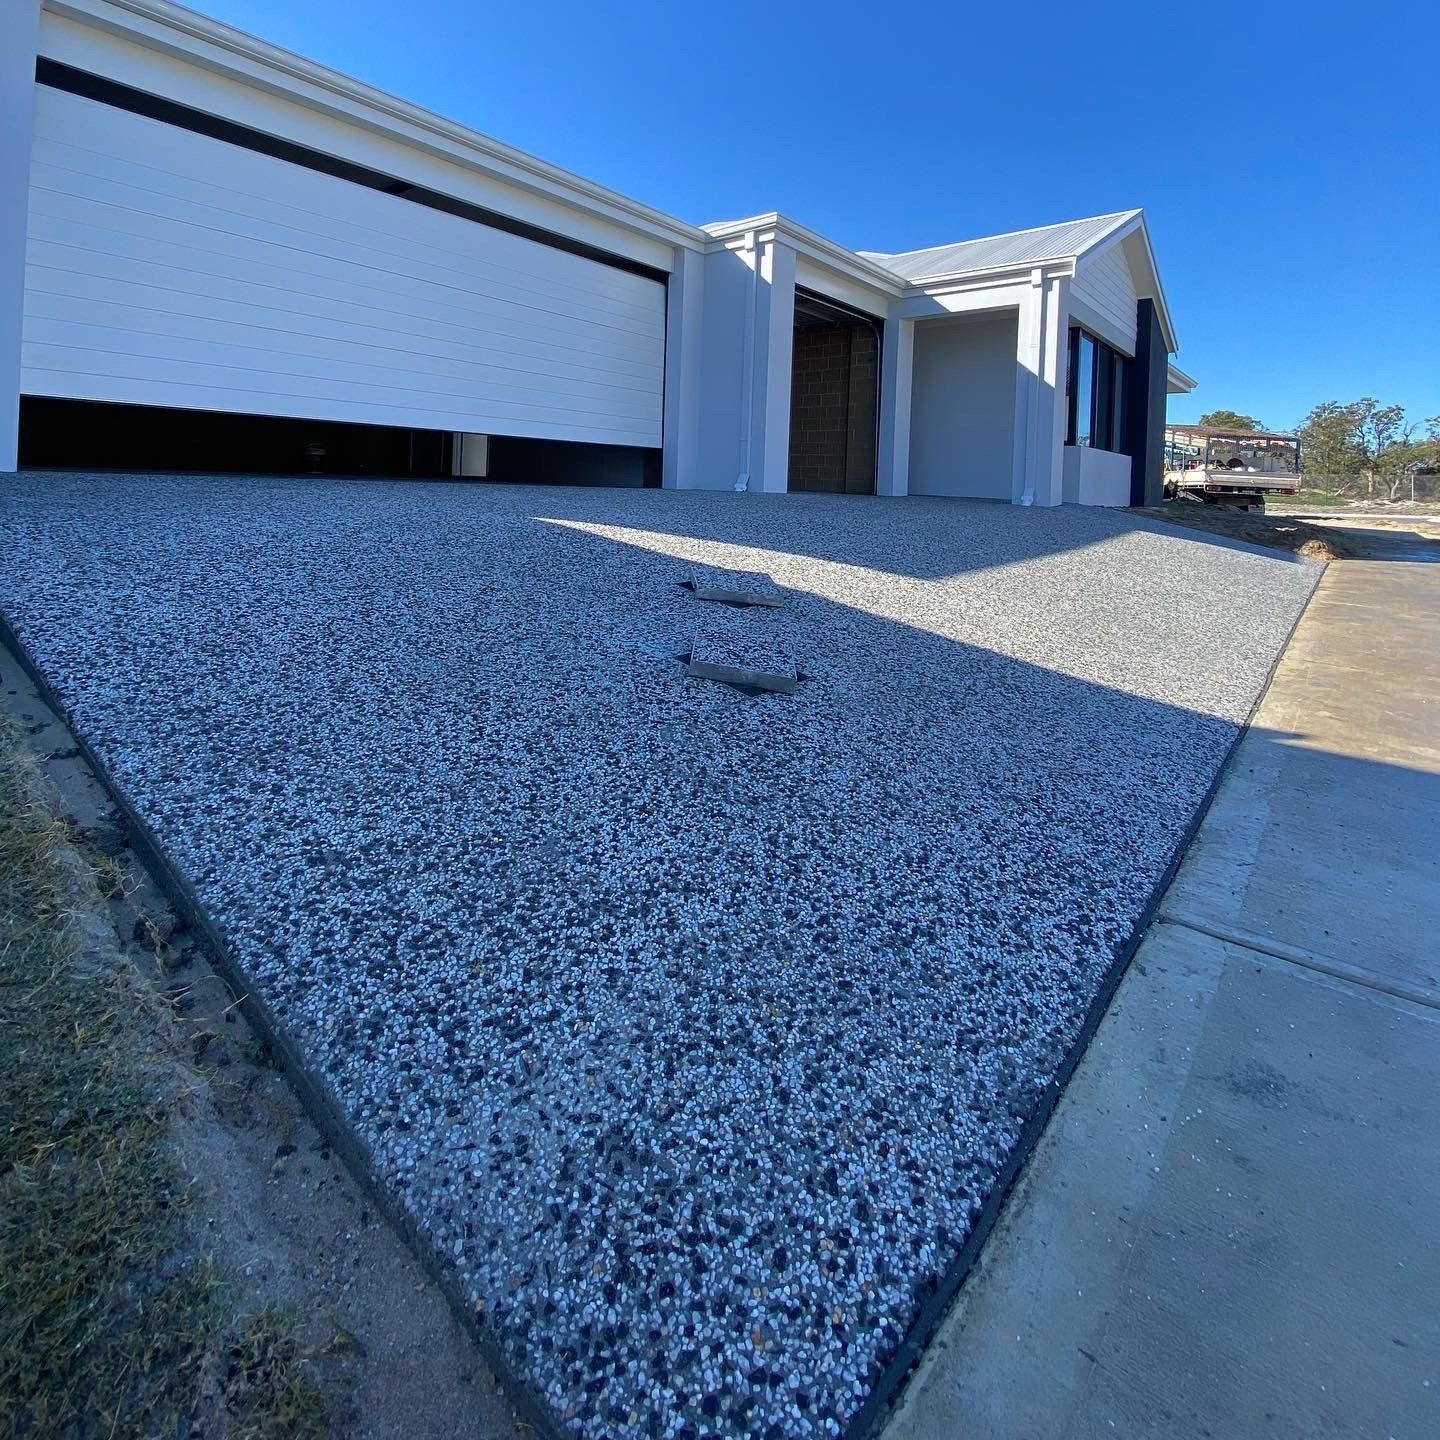 Exposed Aggregate concrete driveway installed in front of the garage